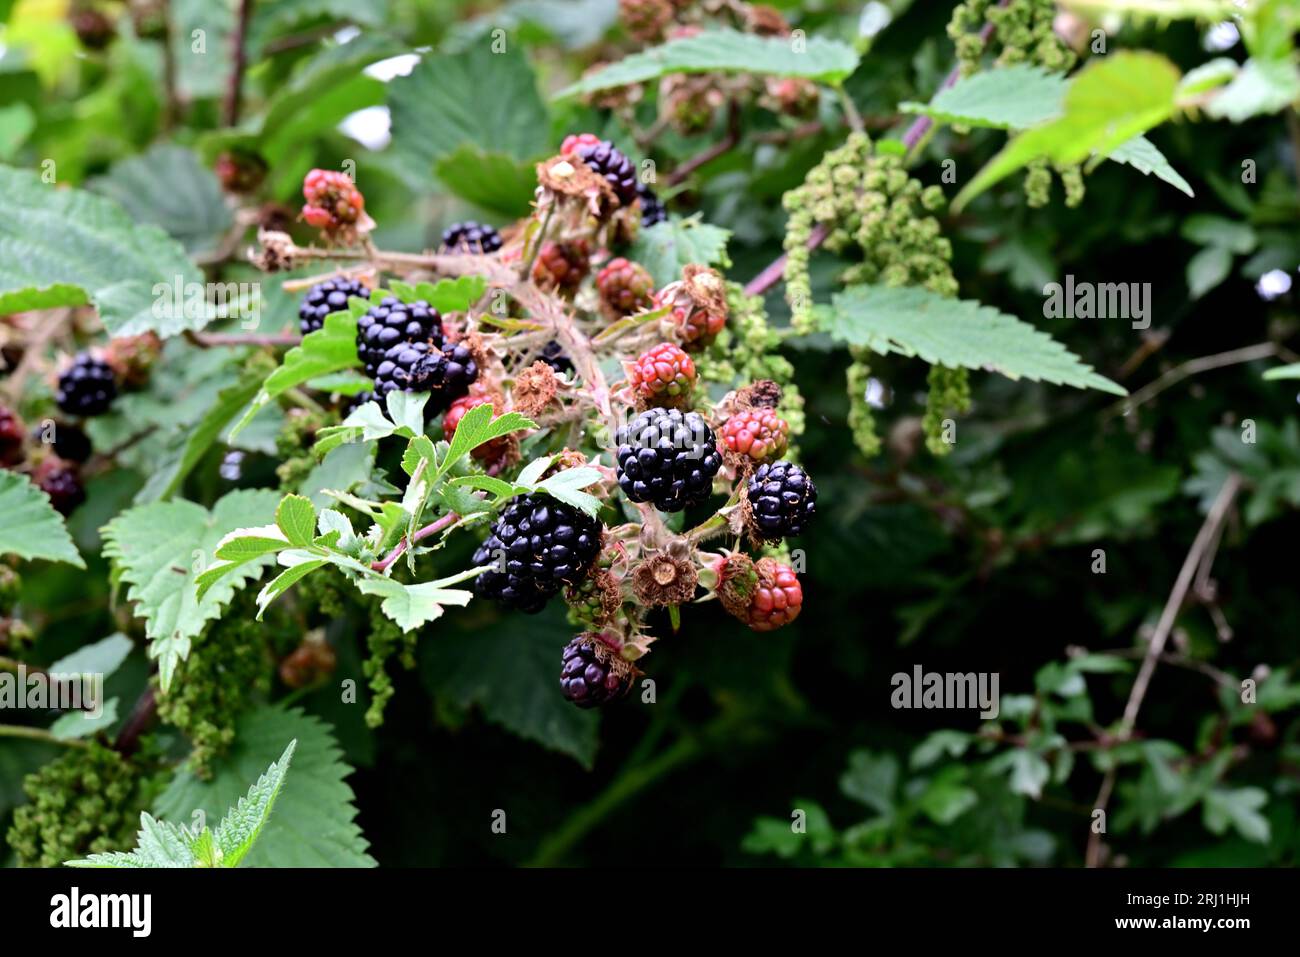 Around the UK - Wild Blackberries ready for collecting Stock Photo